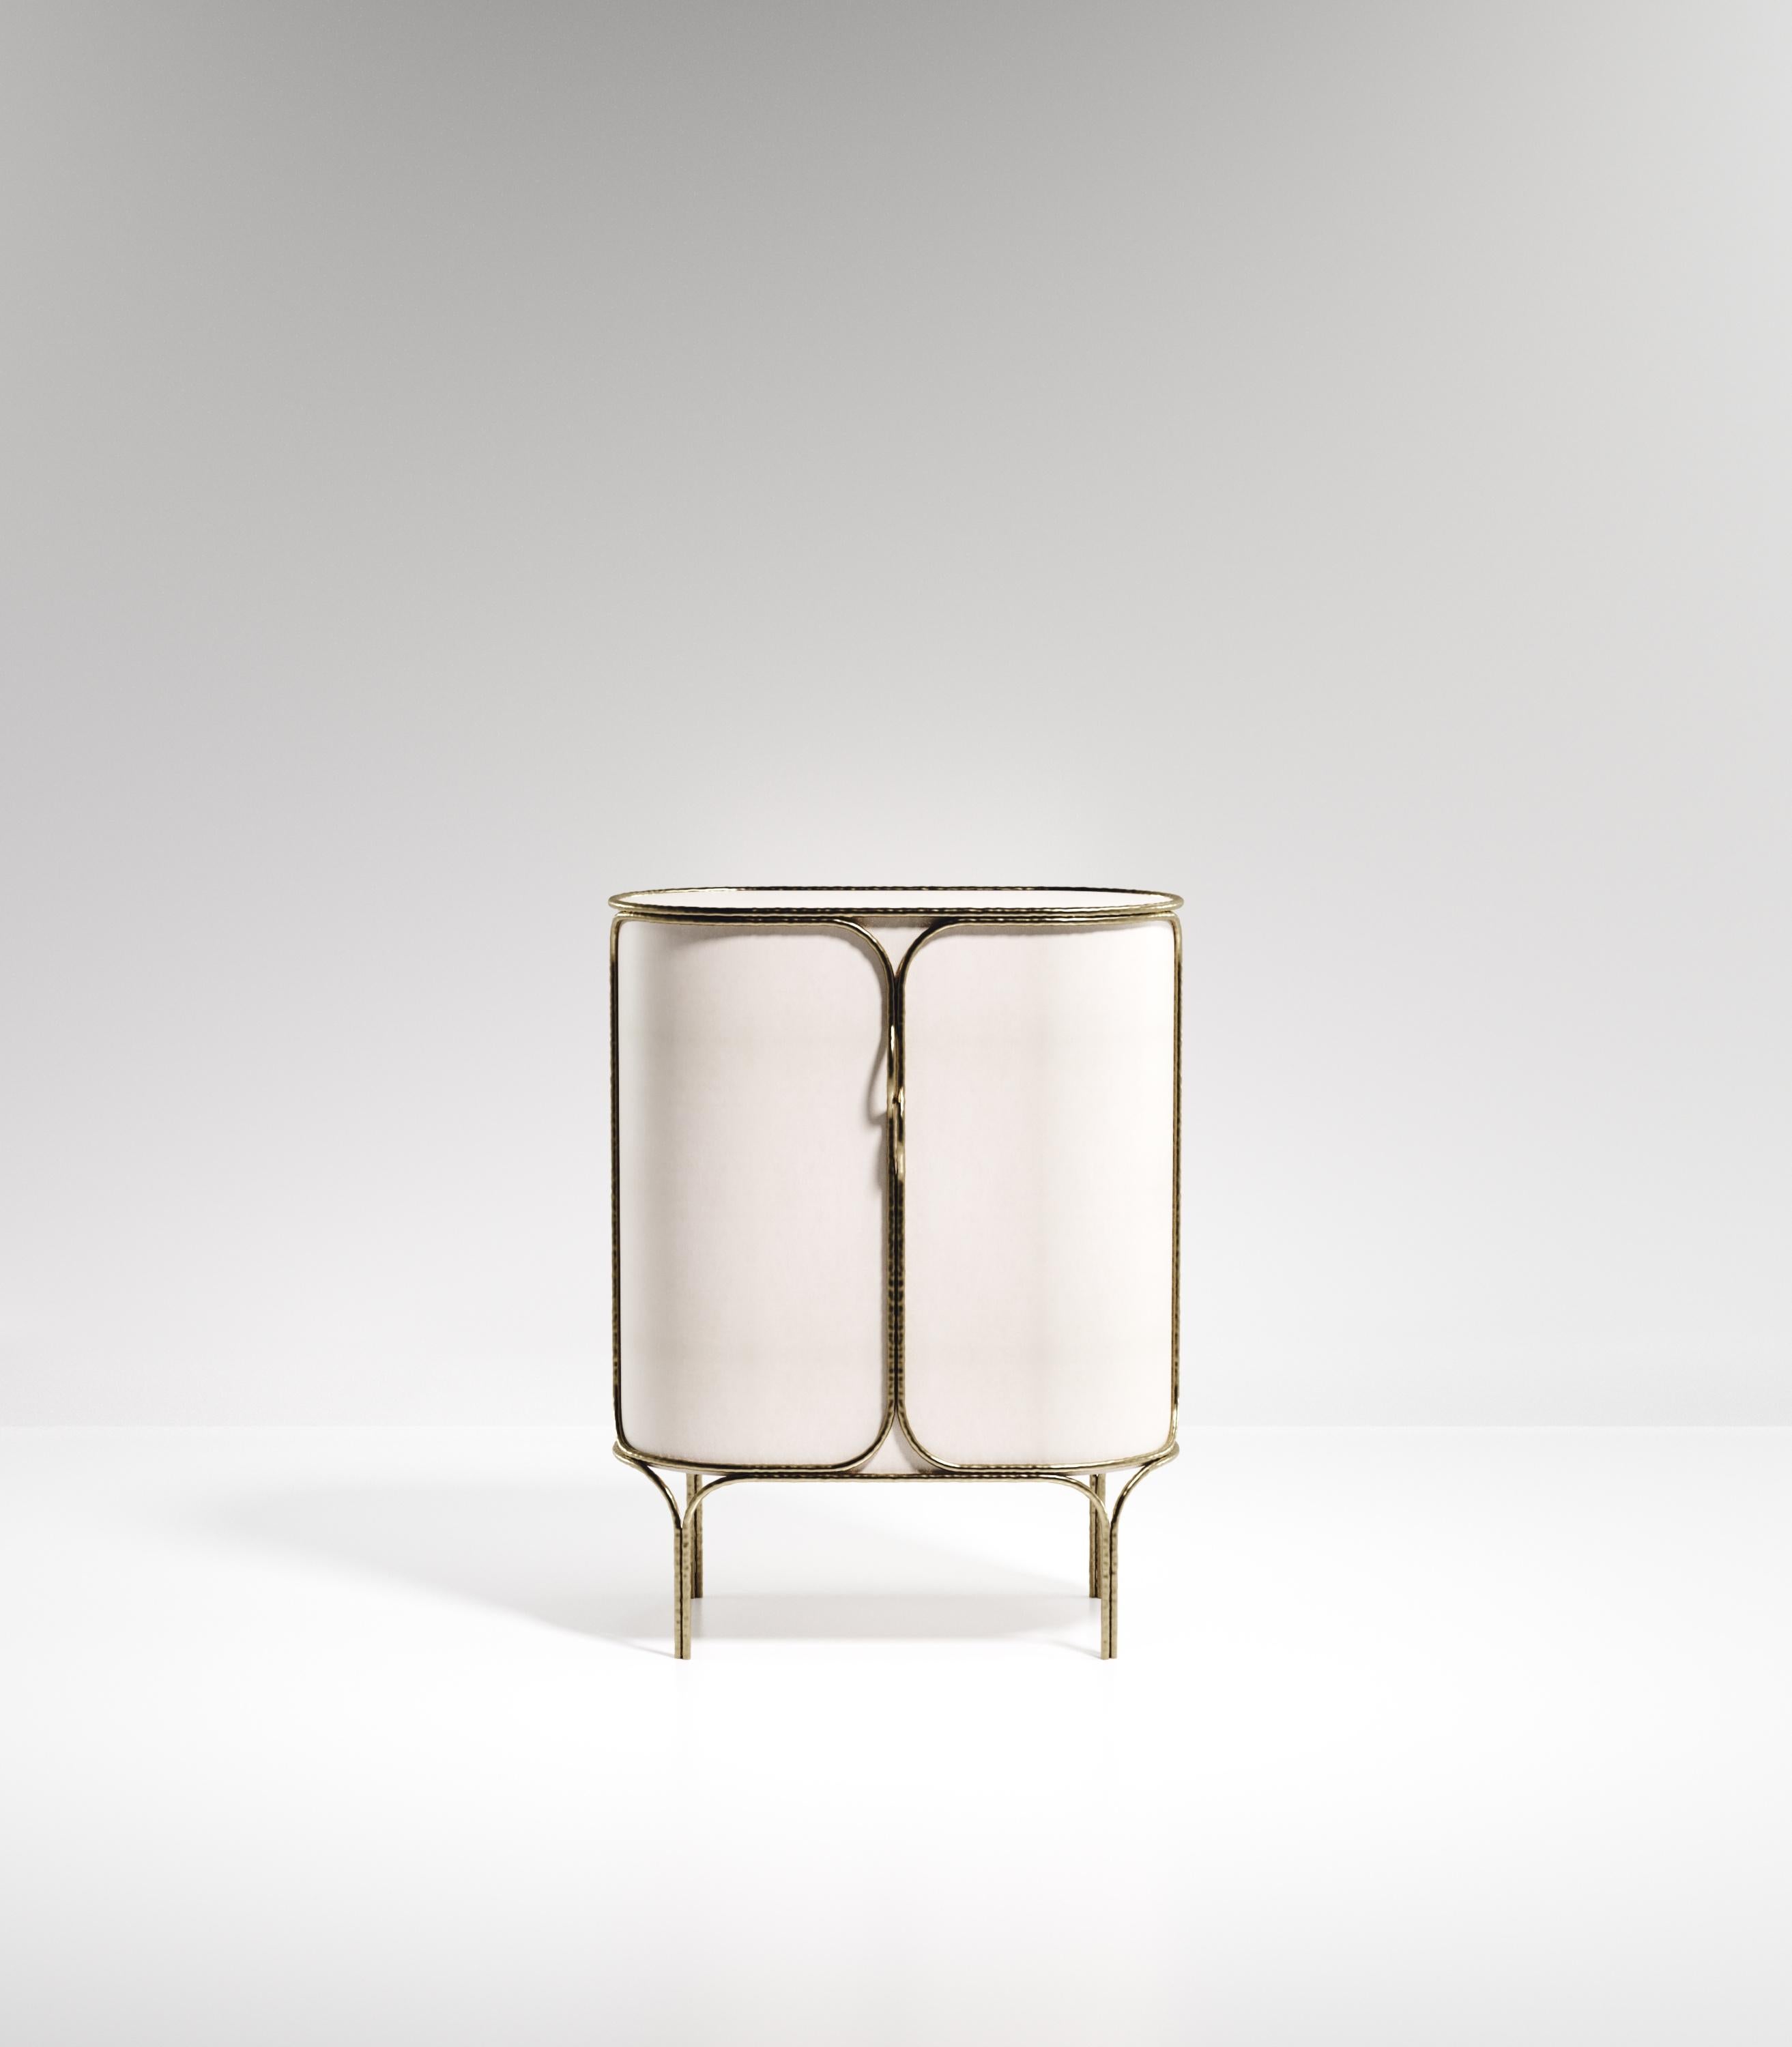 The Arianne bar cabinet by R&Y Augousti is one of a kind statement piece. The overall piece is inlaid in cream parchment accentuated with intricate bronze-patina brass details that have the signature Augousti 